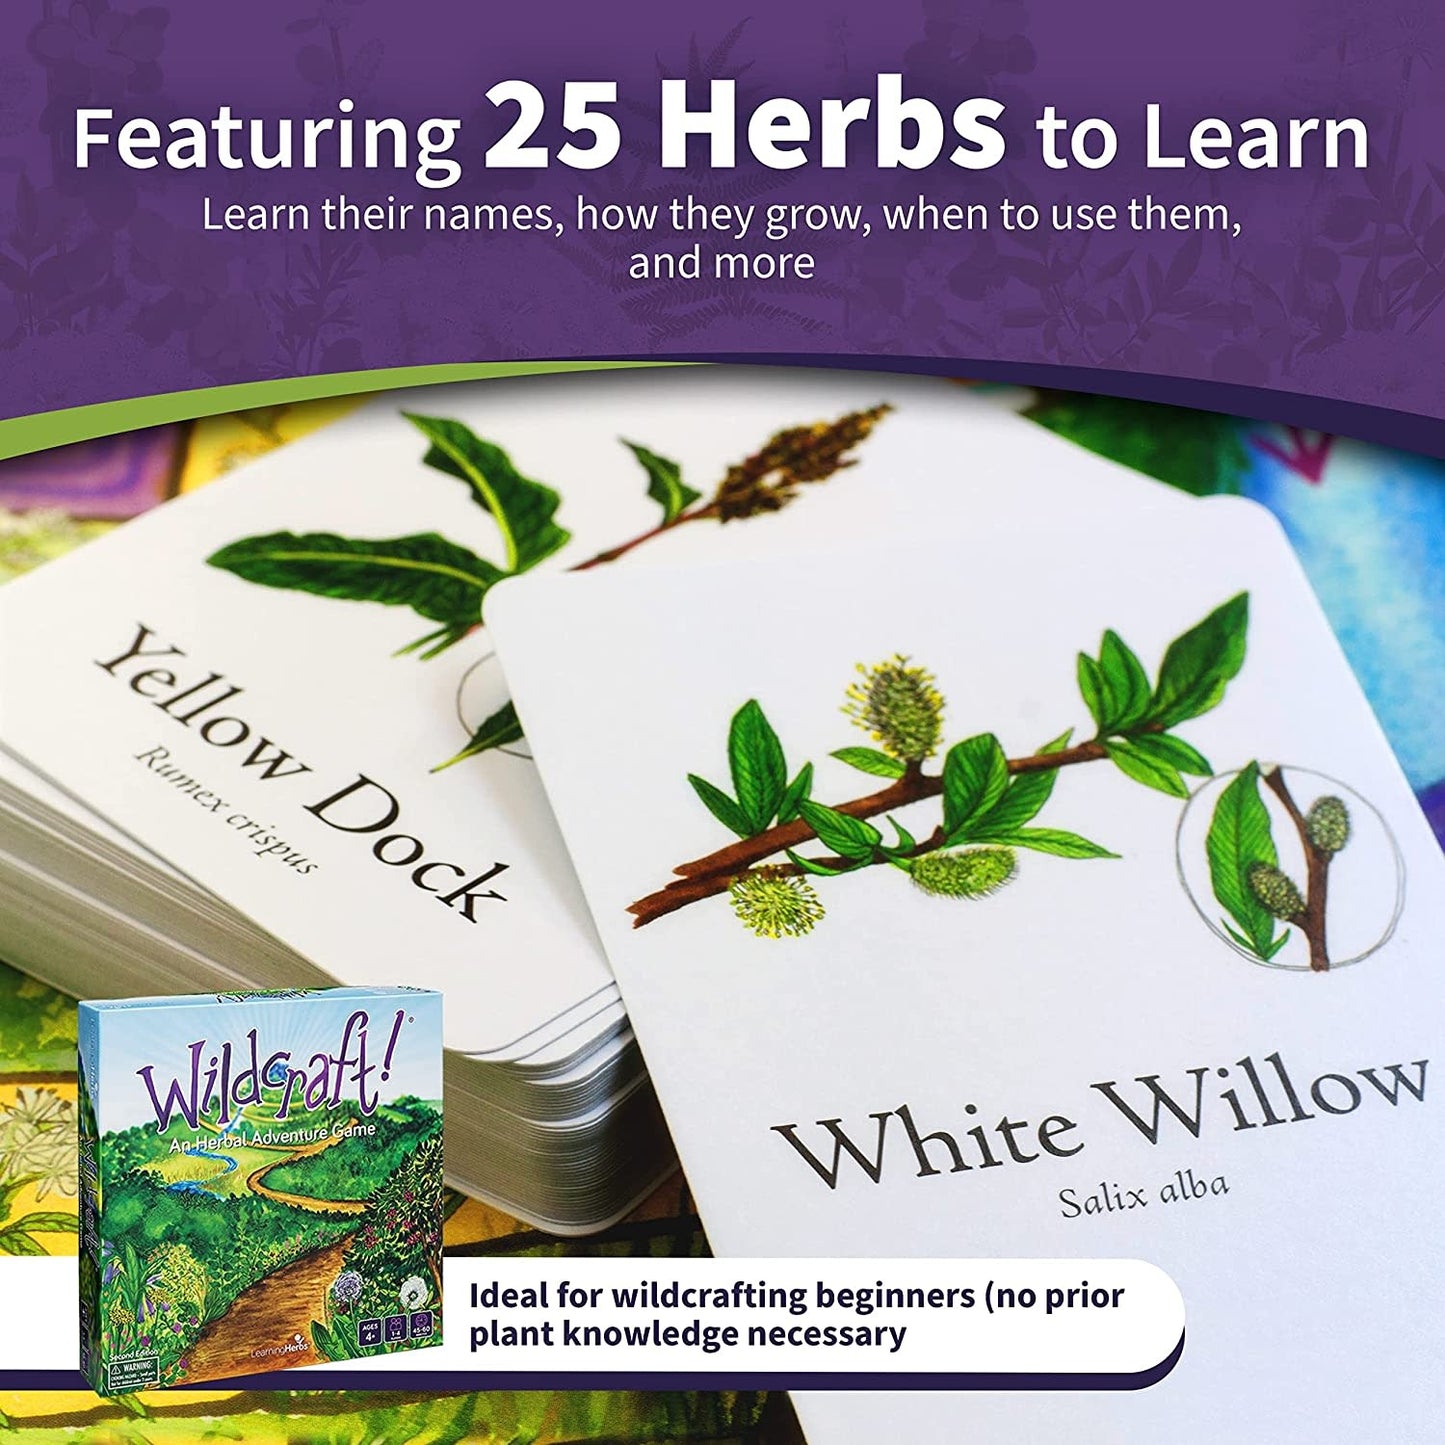 Wildcraft! Board Game - Learning Herbs